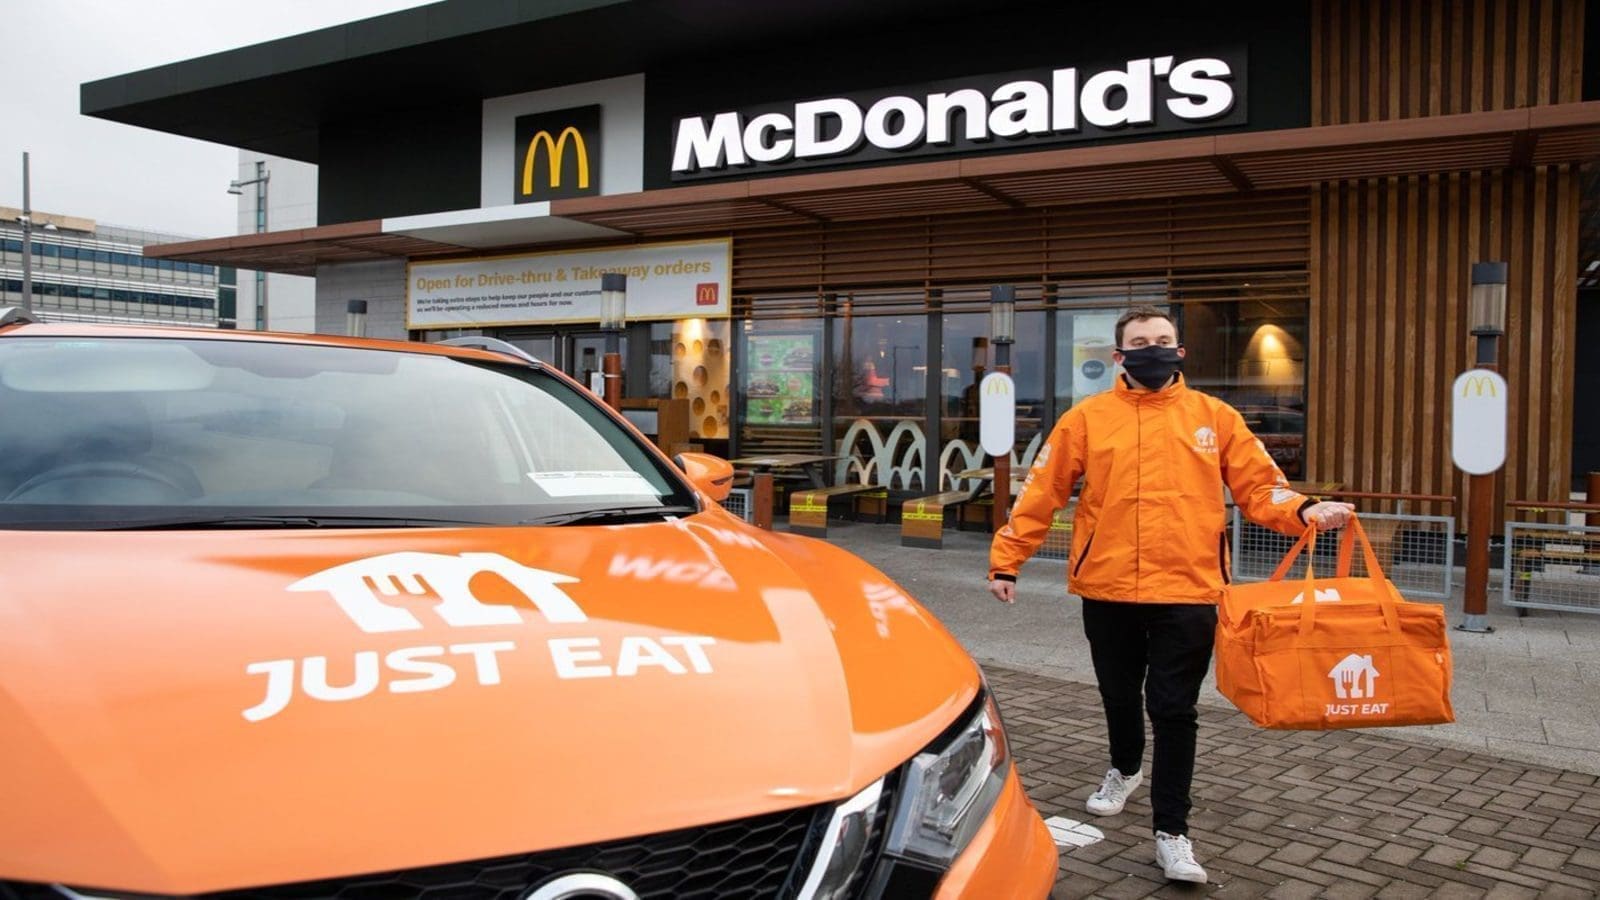 McDonalds partners Just Eat Takeaway to strengthen order delivery capabilities 